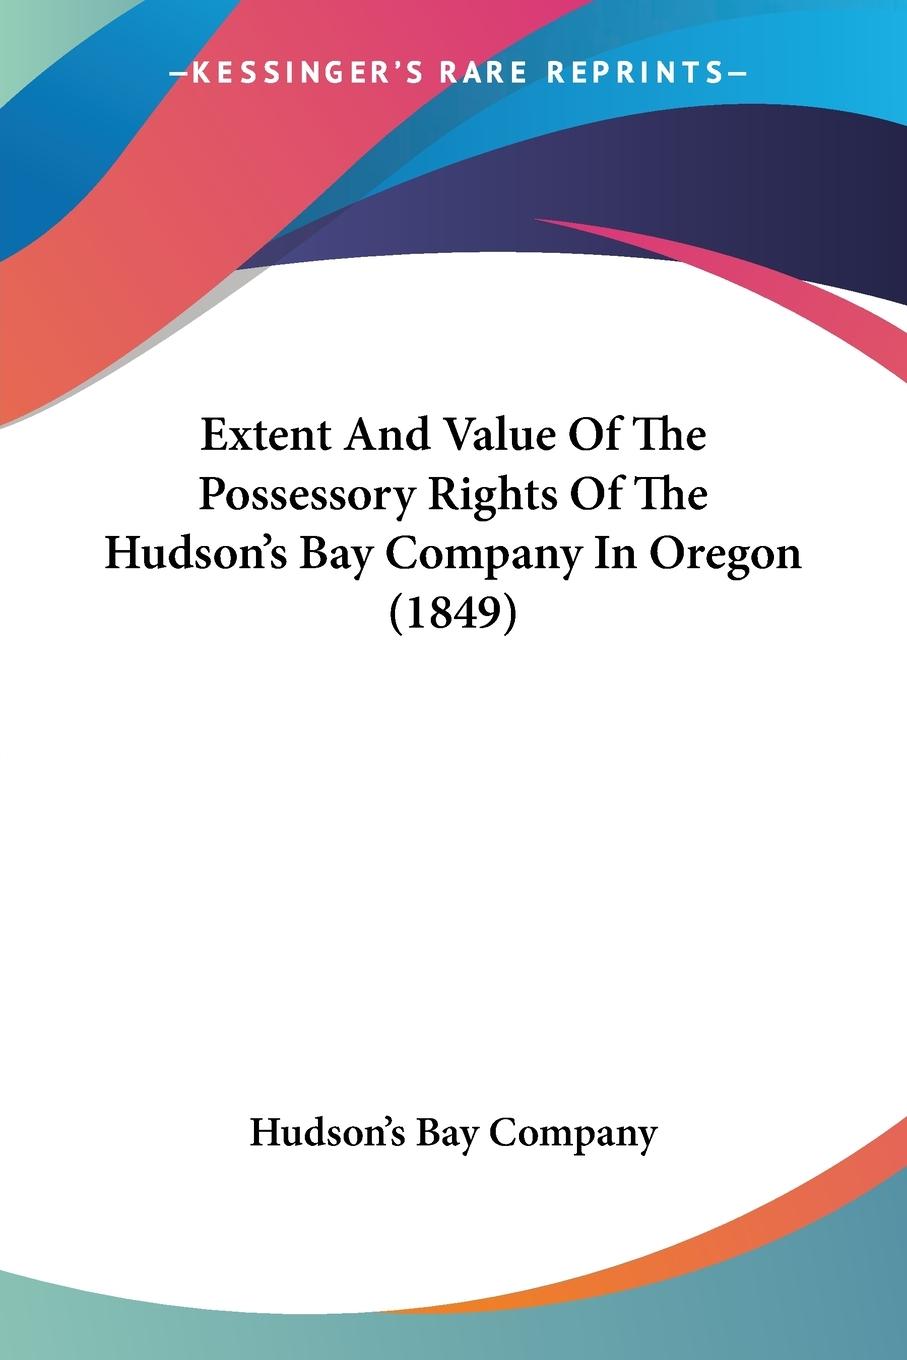 Extent And Value Of The Possessory Rights Of The Hudson s Bay Company In Oregon (1849) - Hudson s Bay Company